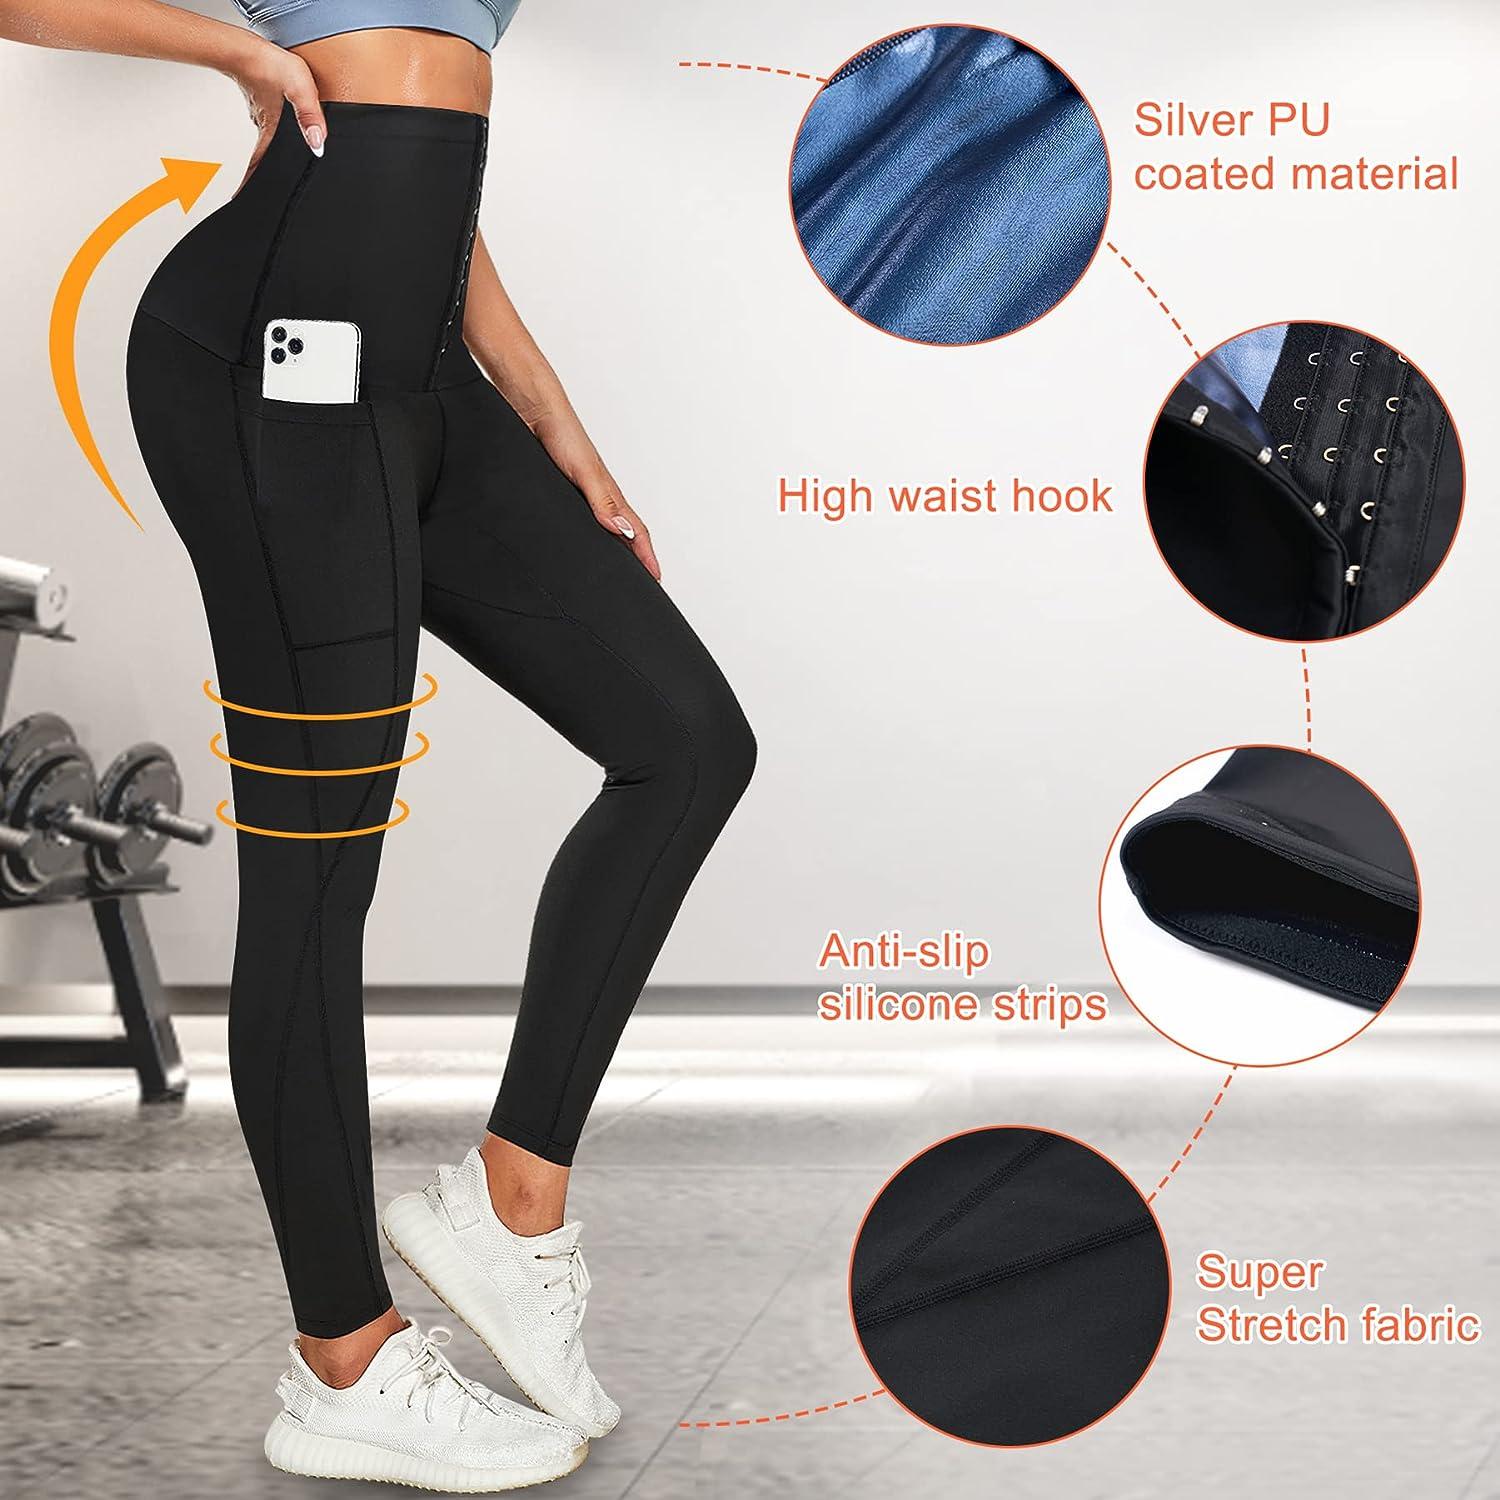 AGILONG Women Sauna Sweat Pants with Pocket High Waist Workout Capris  Leggings Hot Thermo Body Shaper Weight Loss Black Large